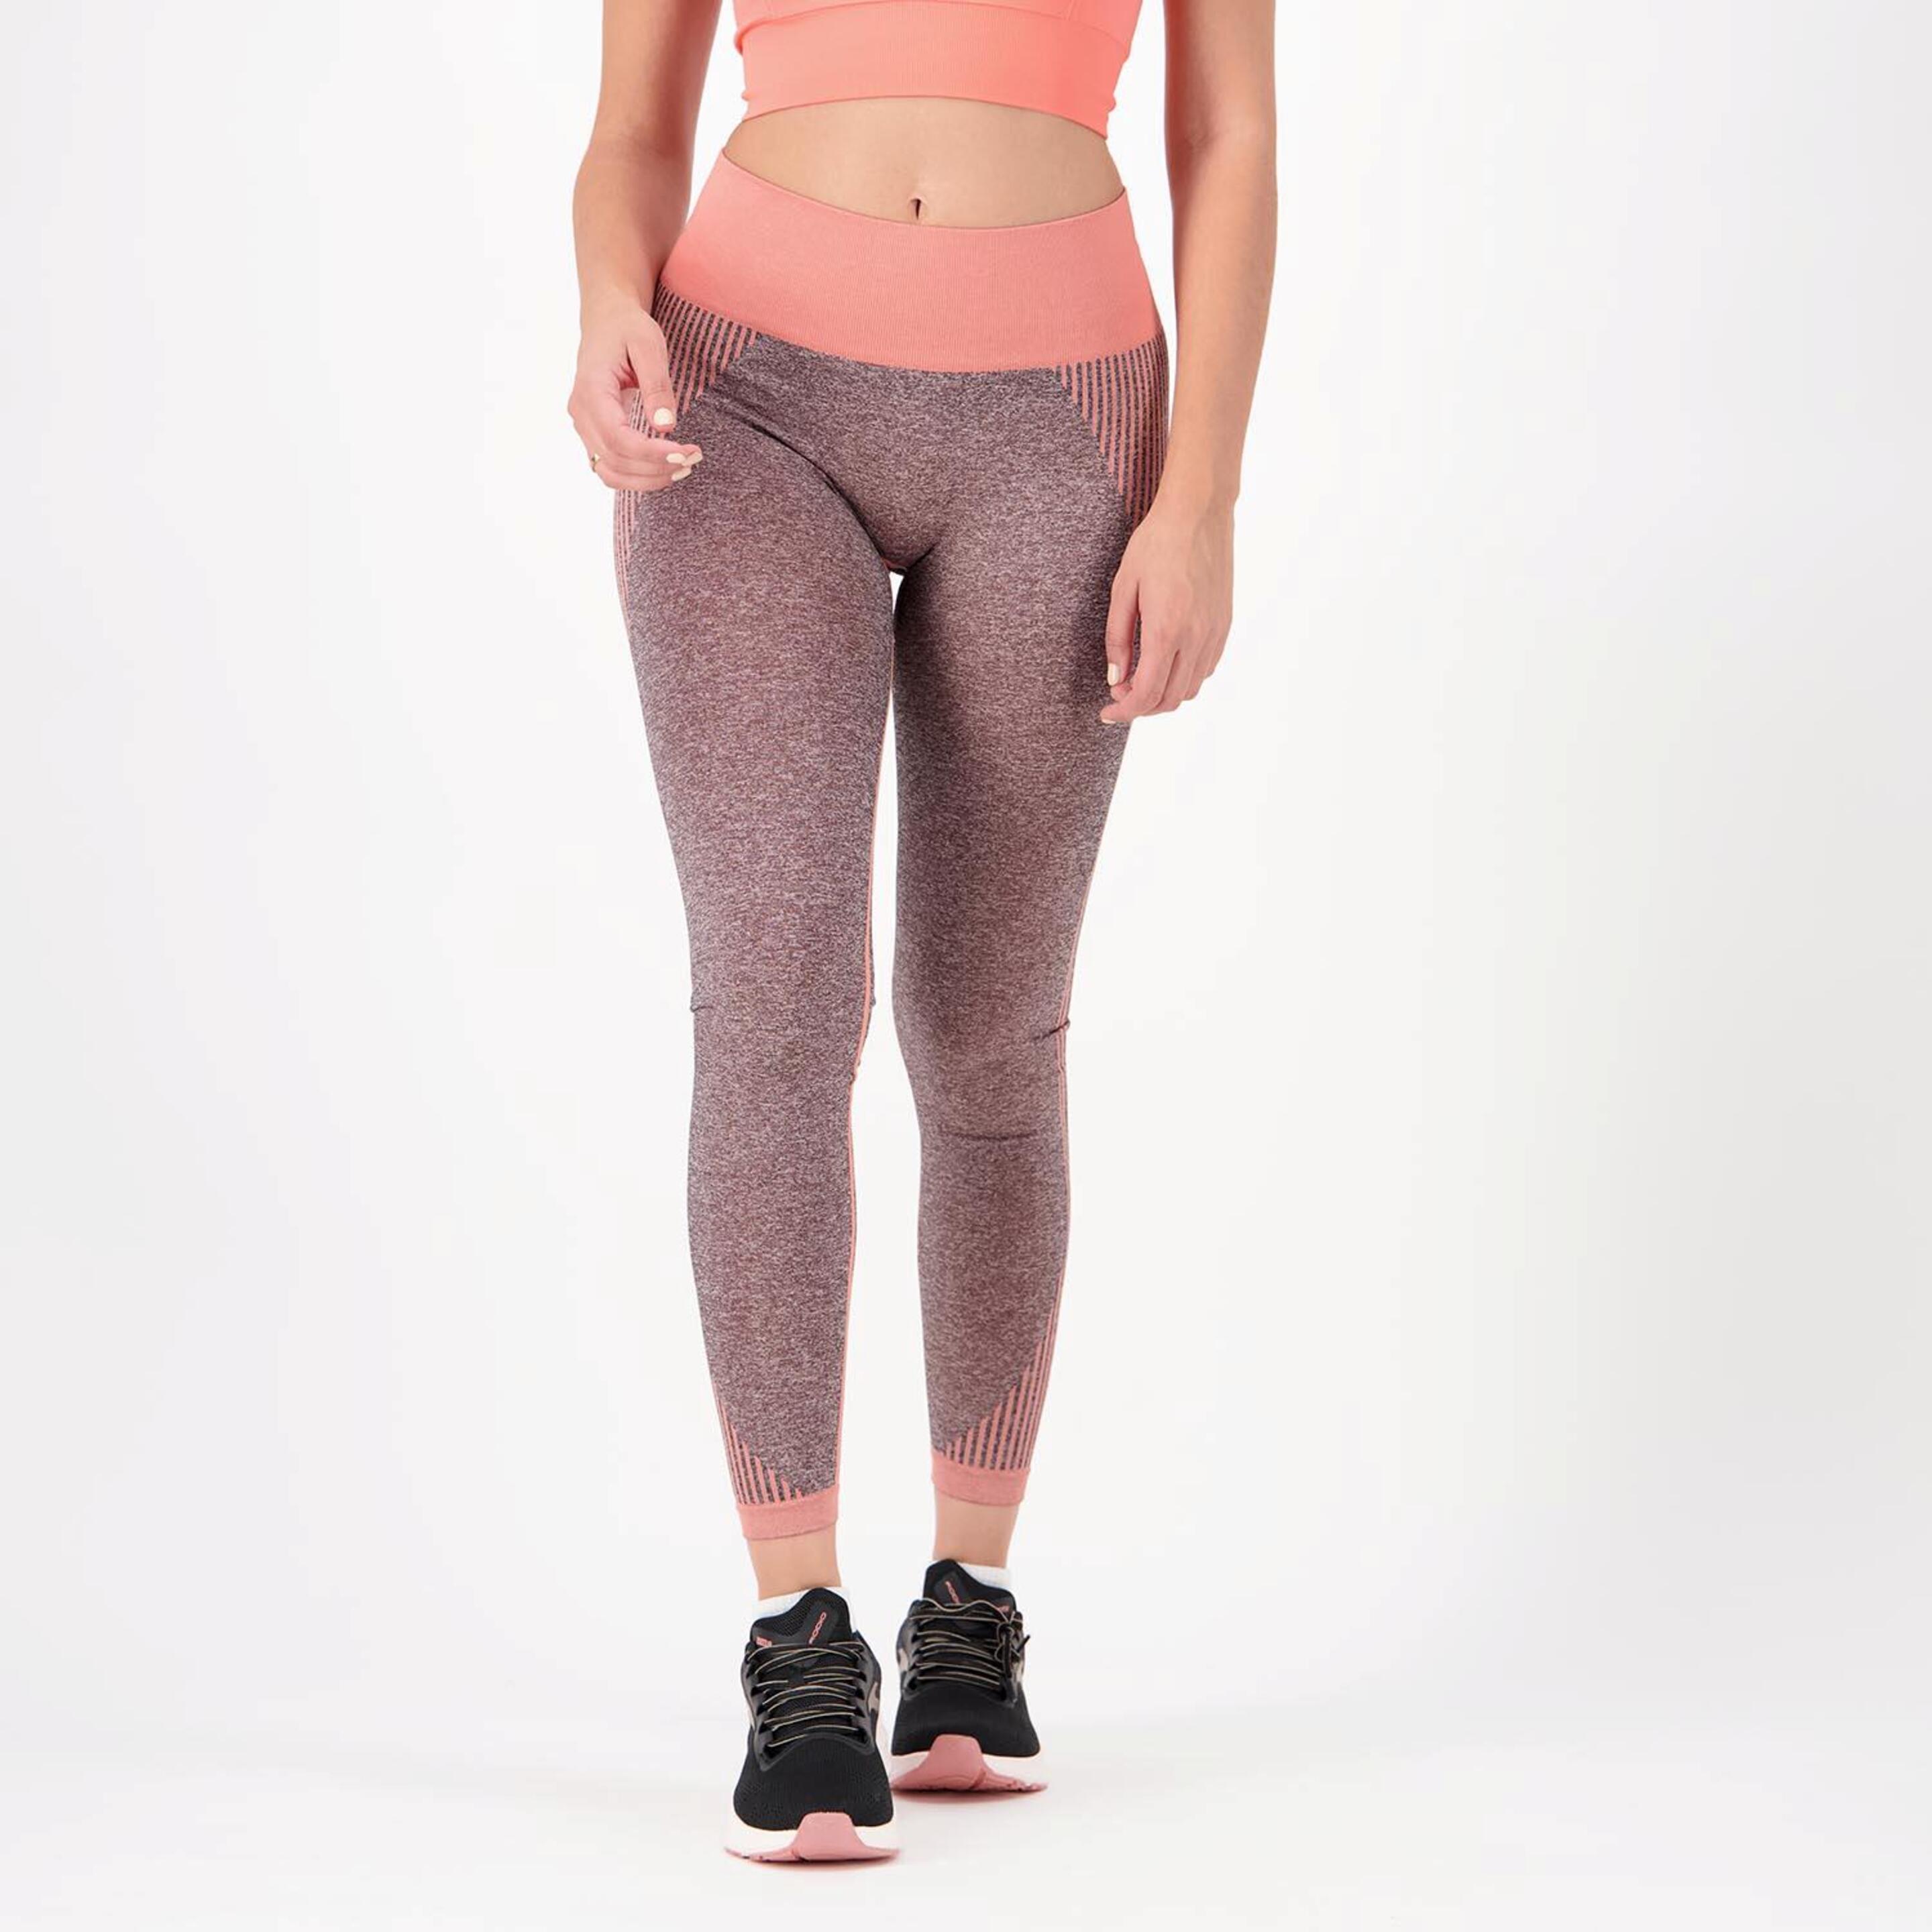 Doone Supportive - Gris - Mallas Fitness Mujer  | Sprinter